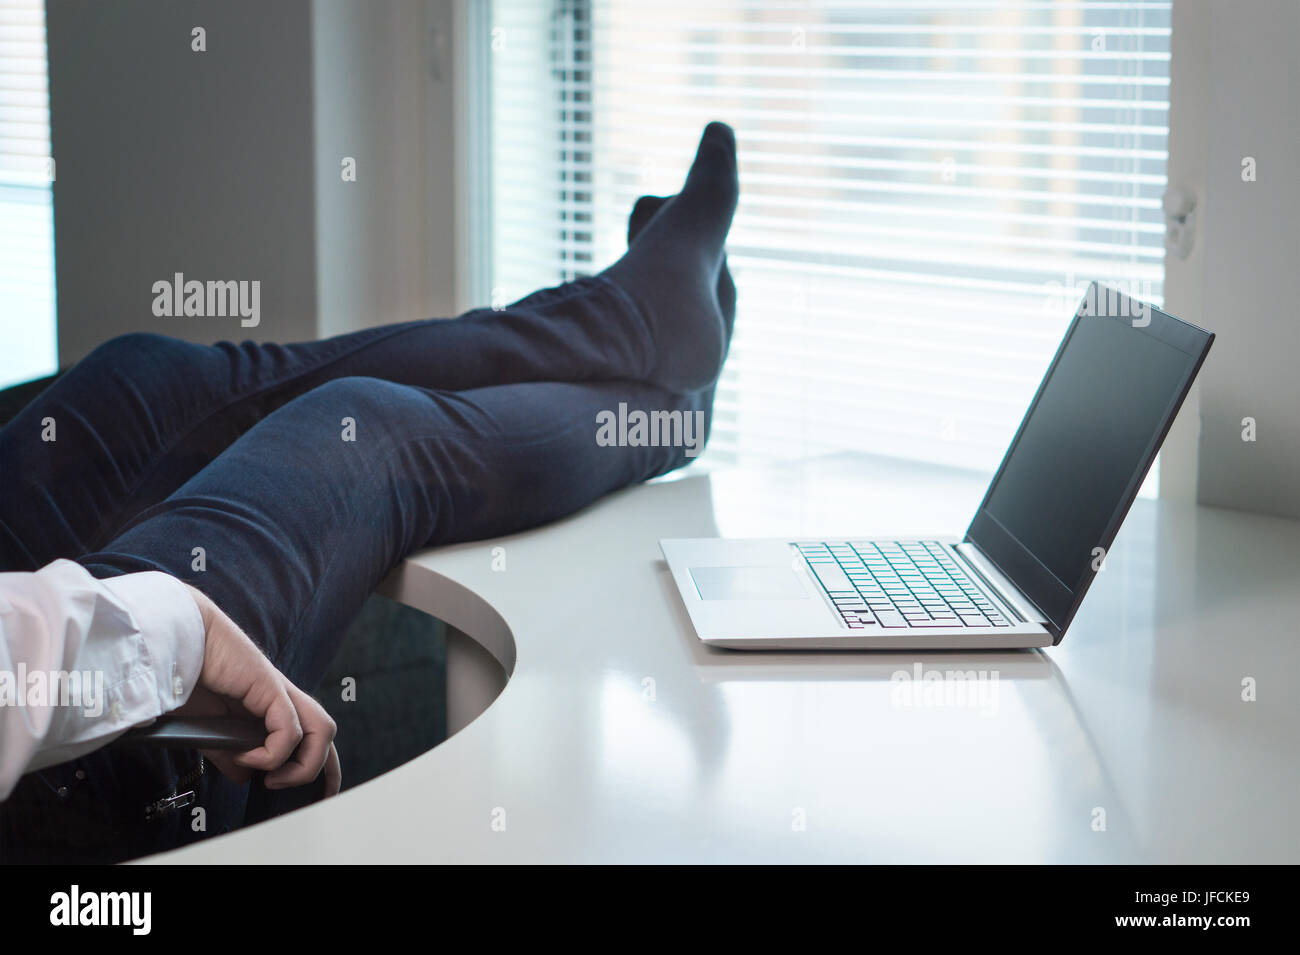 Lazy office worker with feet and socks on table. Useless and relaxing man doing nothing or taking break from work in workstation. Stock Photo